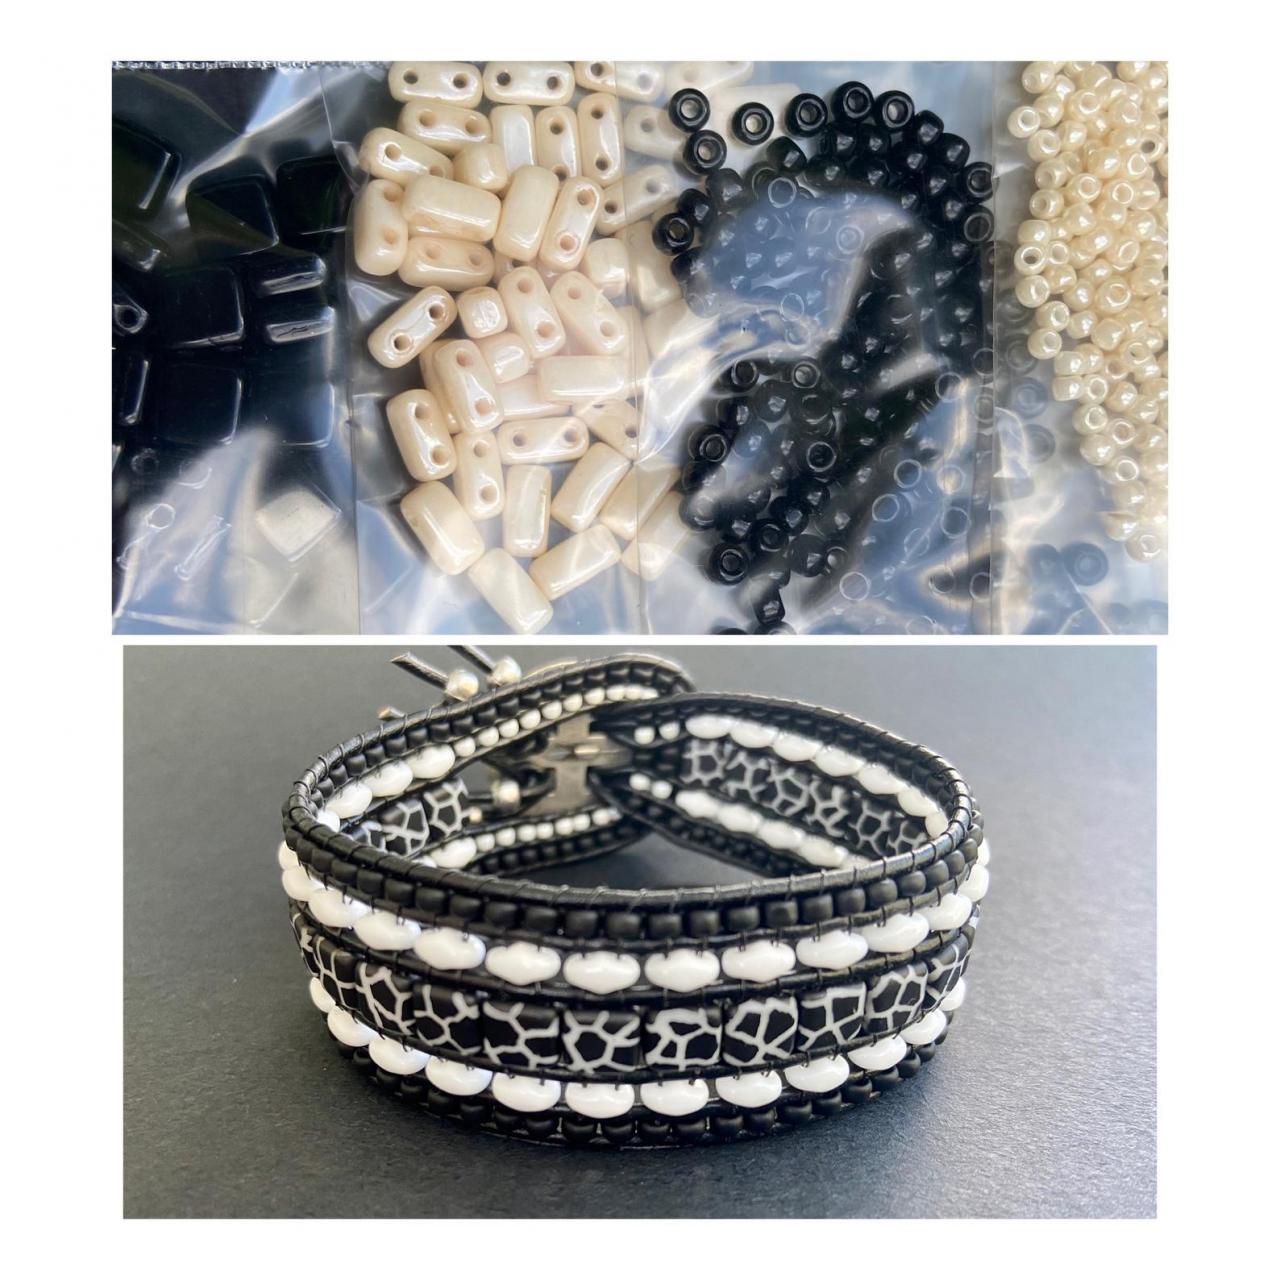 Kit Black & Ivory Wide Leather Beaded Cuff Kit By Leila Martin Bohemian Diy Complete Kit With Tutorial No Tools